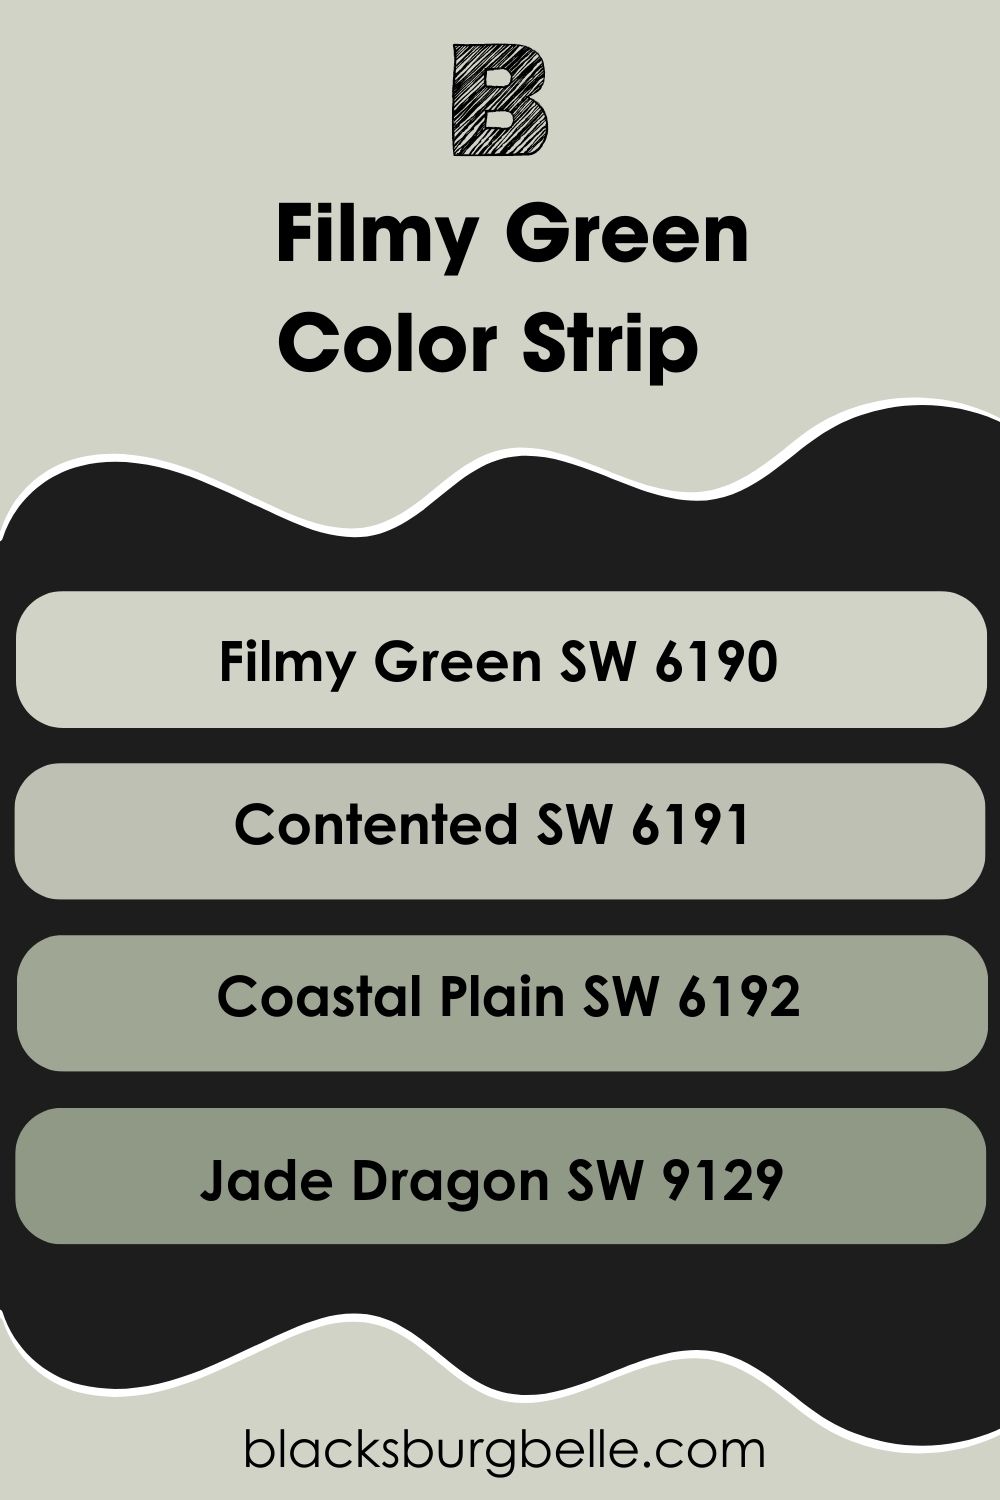 Filmy Green Color Strip